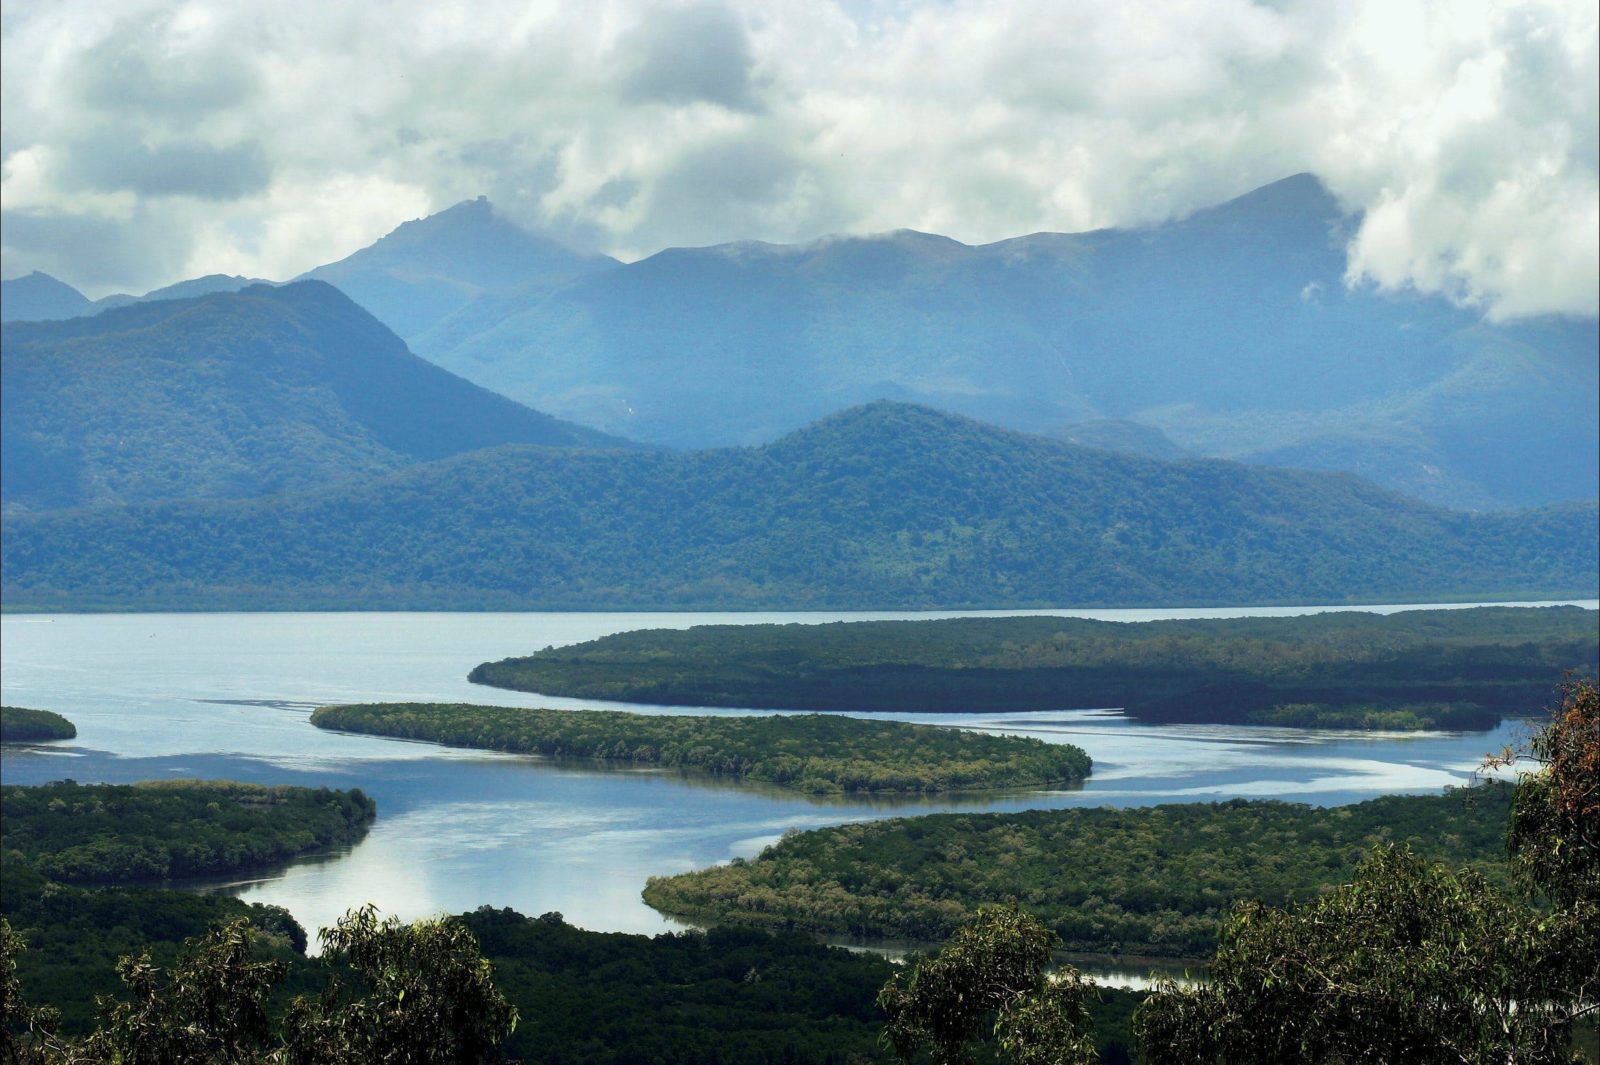 View from mainland across the Hinchinbrook Channel to the island.